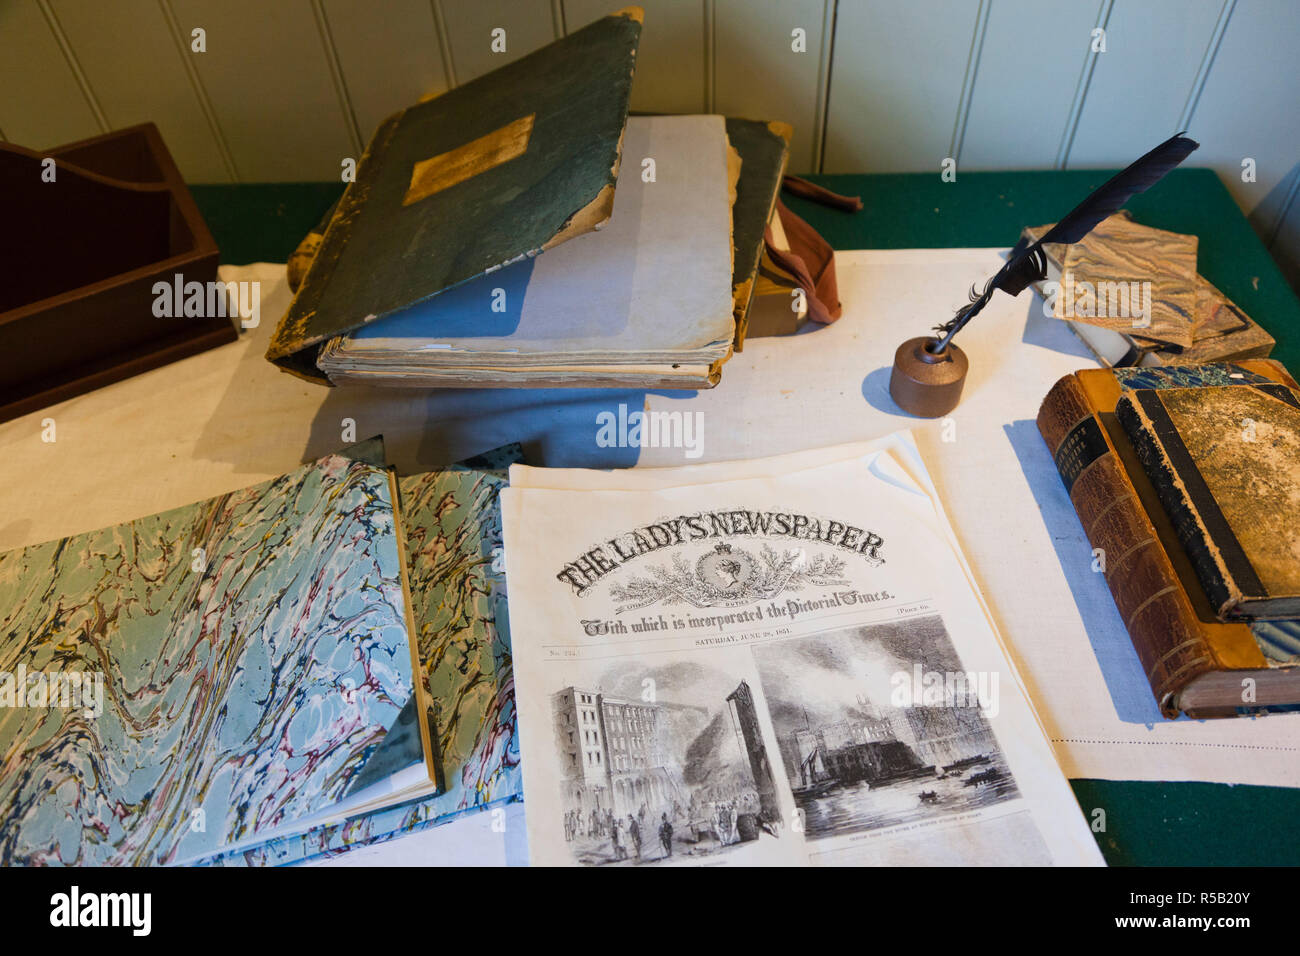 Canada, British Columbia, Vancouver-area, Langley, Fort Langley National Historic Site, fortified trading post built in 1827, desk with The Ladys Newspaper Stock Photo